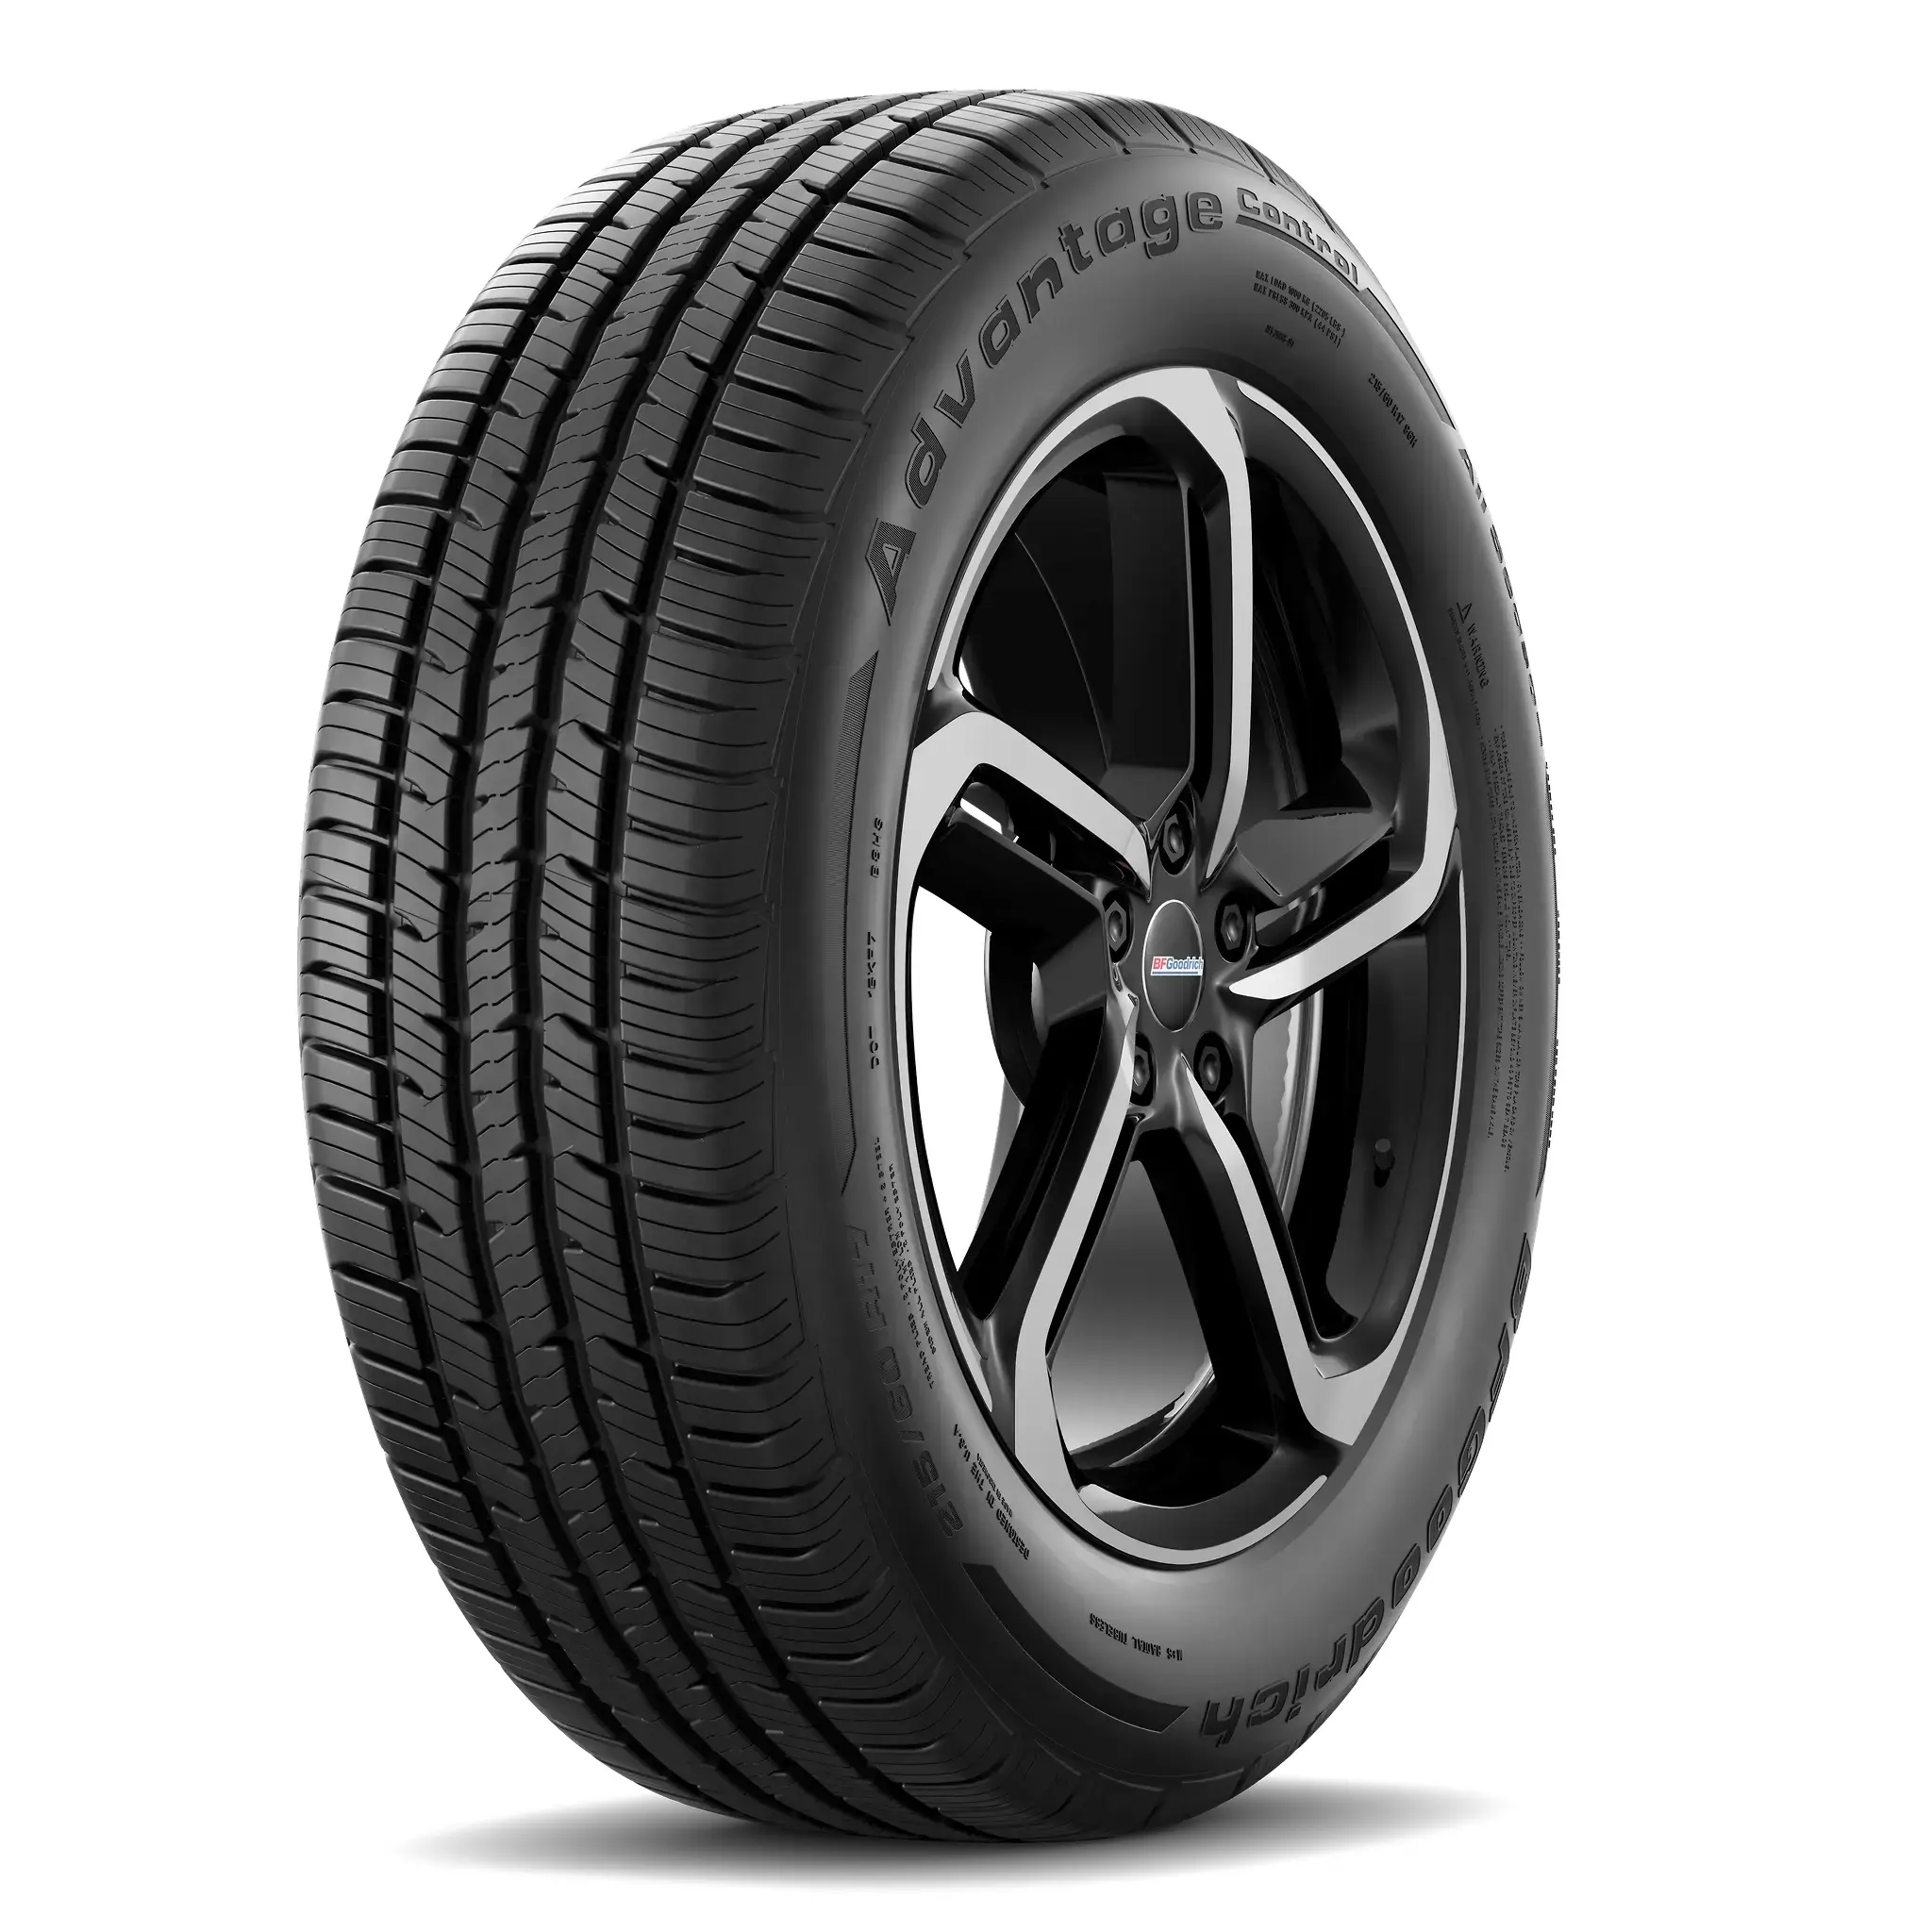 Grade Car Tires For Export In Bulk. All grade used tires available for sale